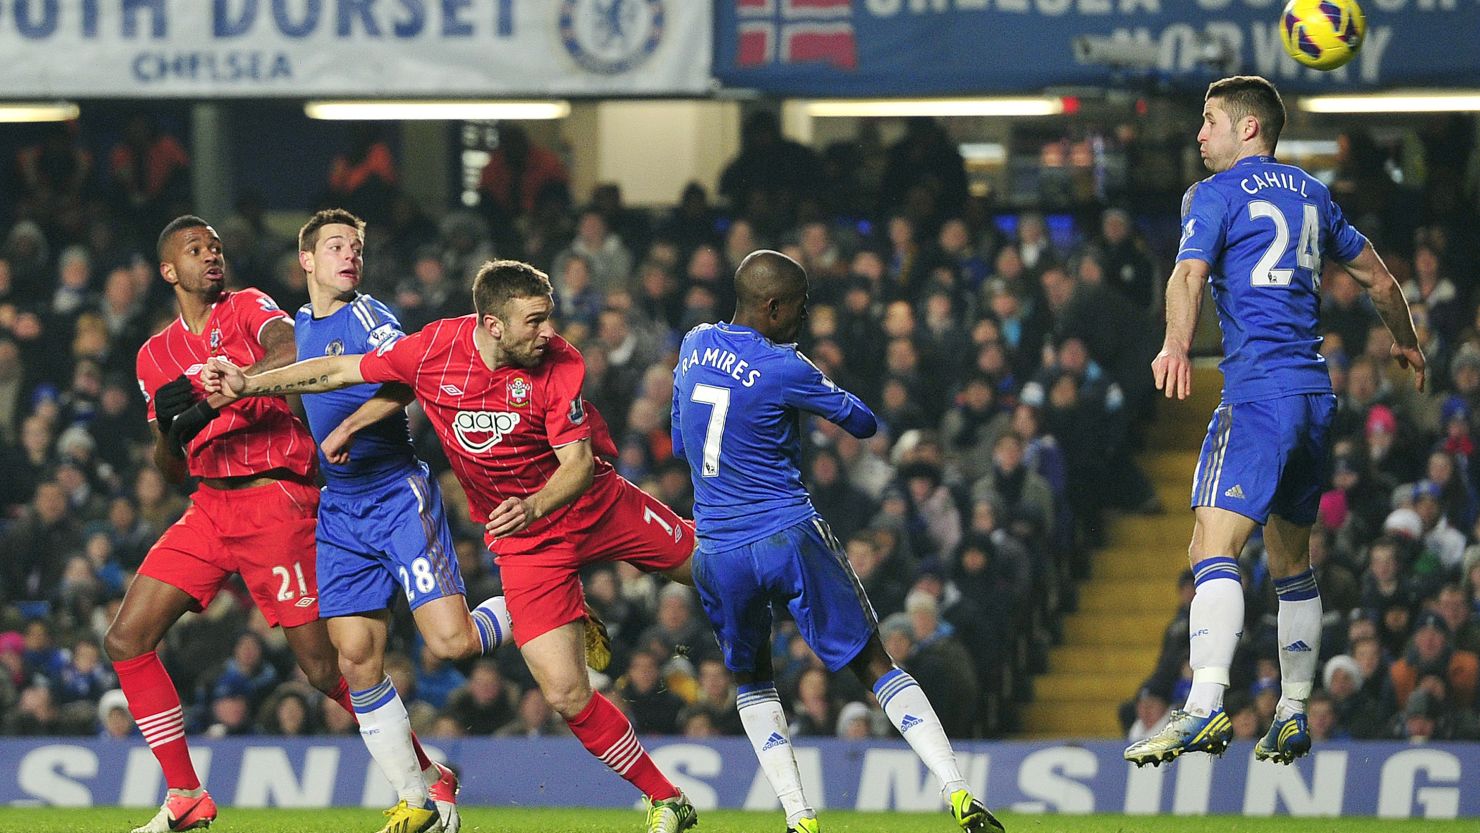 Rickie Lambert came off the bench to spark a Southampton comeback  as Chelsea threw away a two-goal lead to draw 2-2.